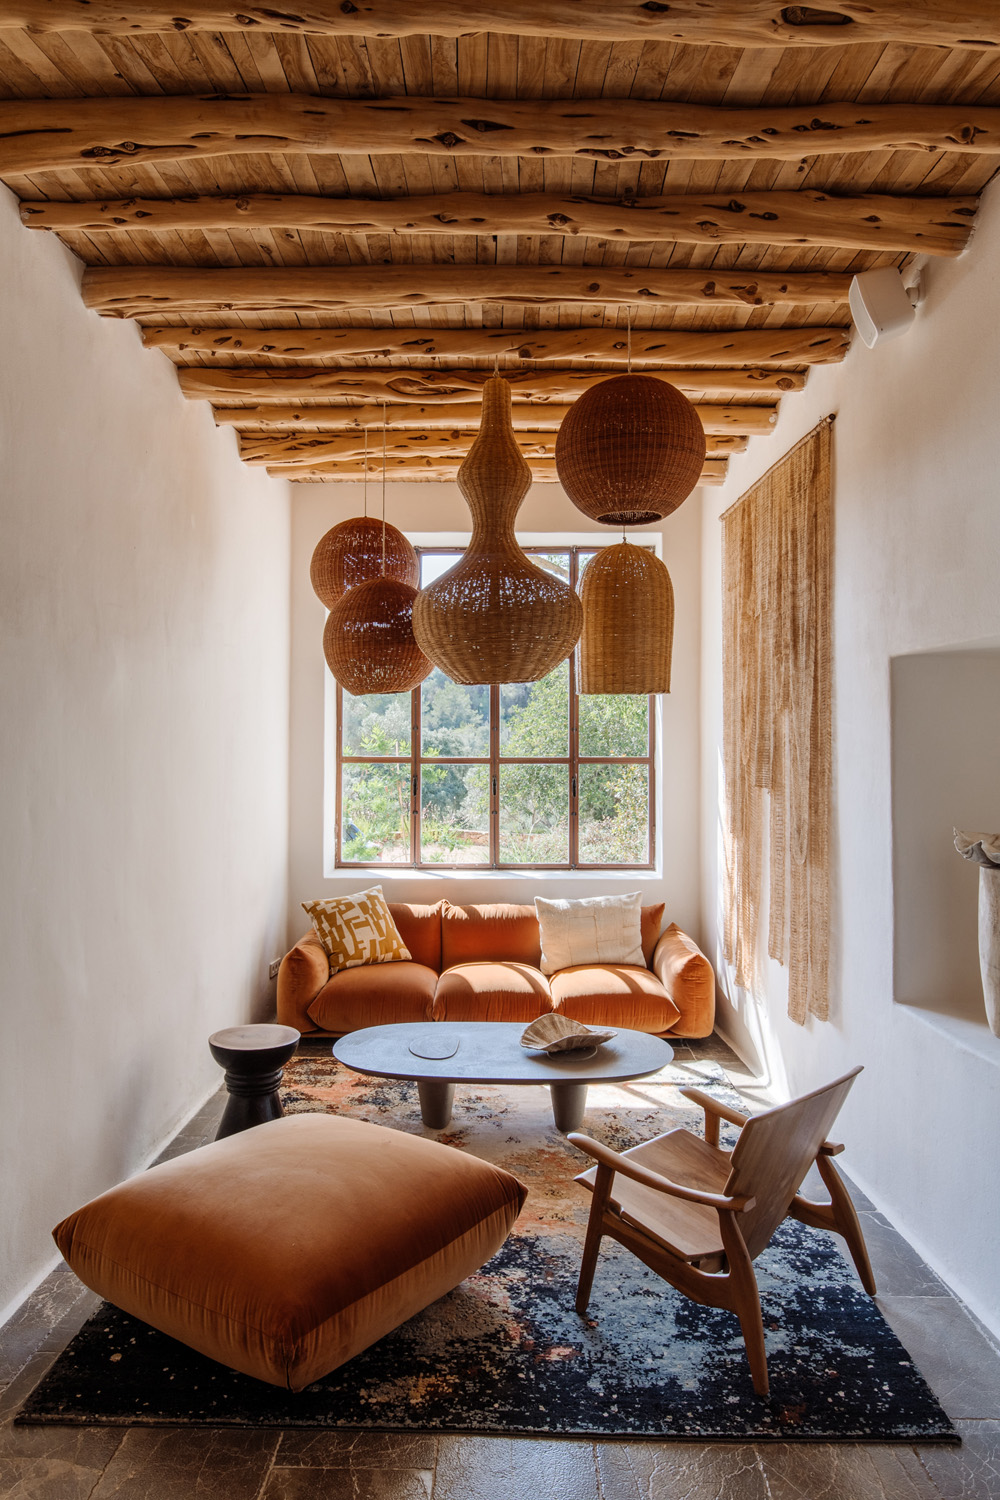 Considered interior of a design-led Ibiza holiday home